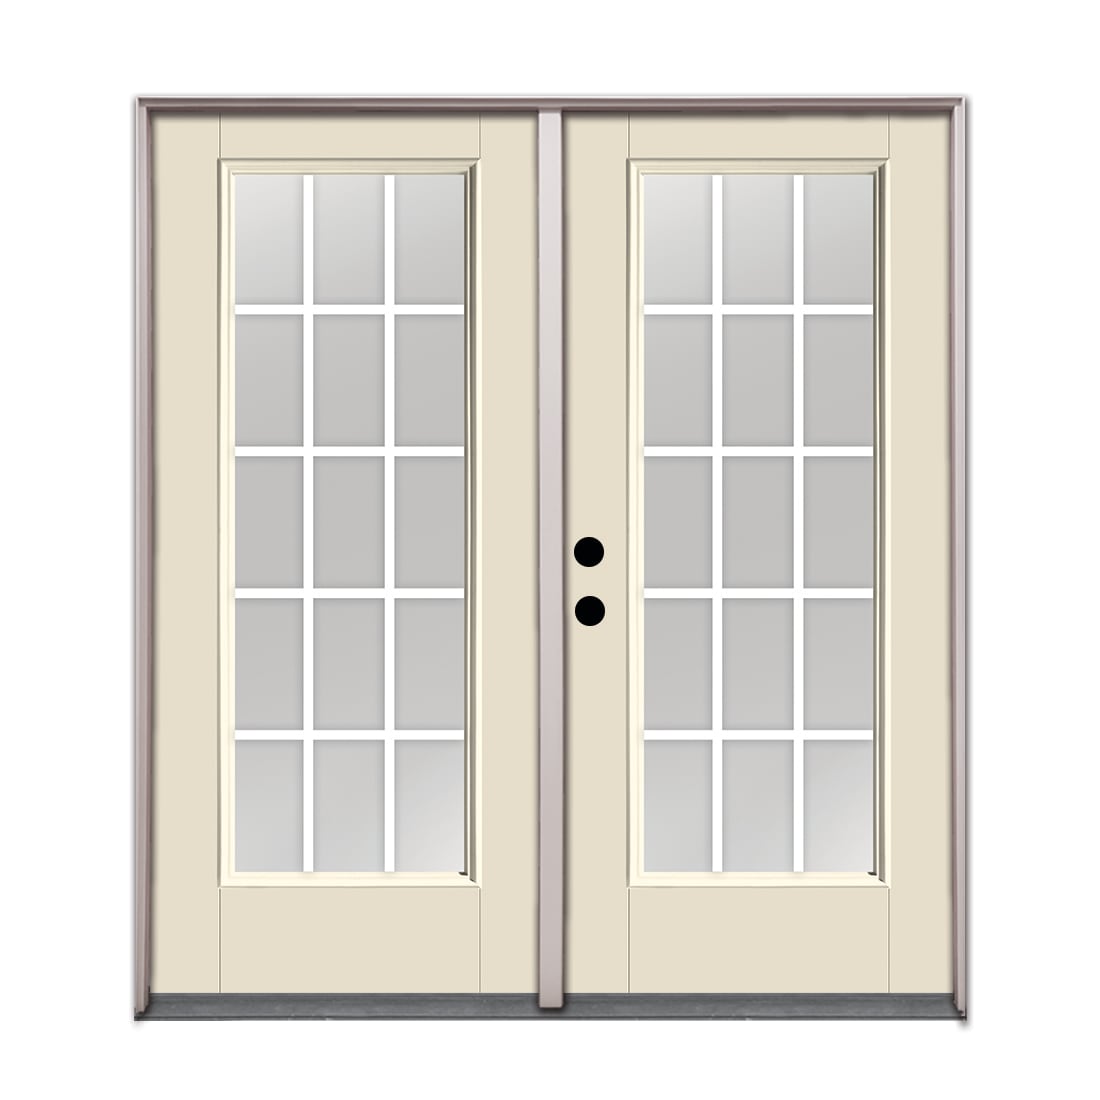 2-PANEL 6'9'' ROUGH OPENING HEIGHT (FRENCH STYLE) SLIDING DOOR